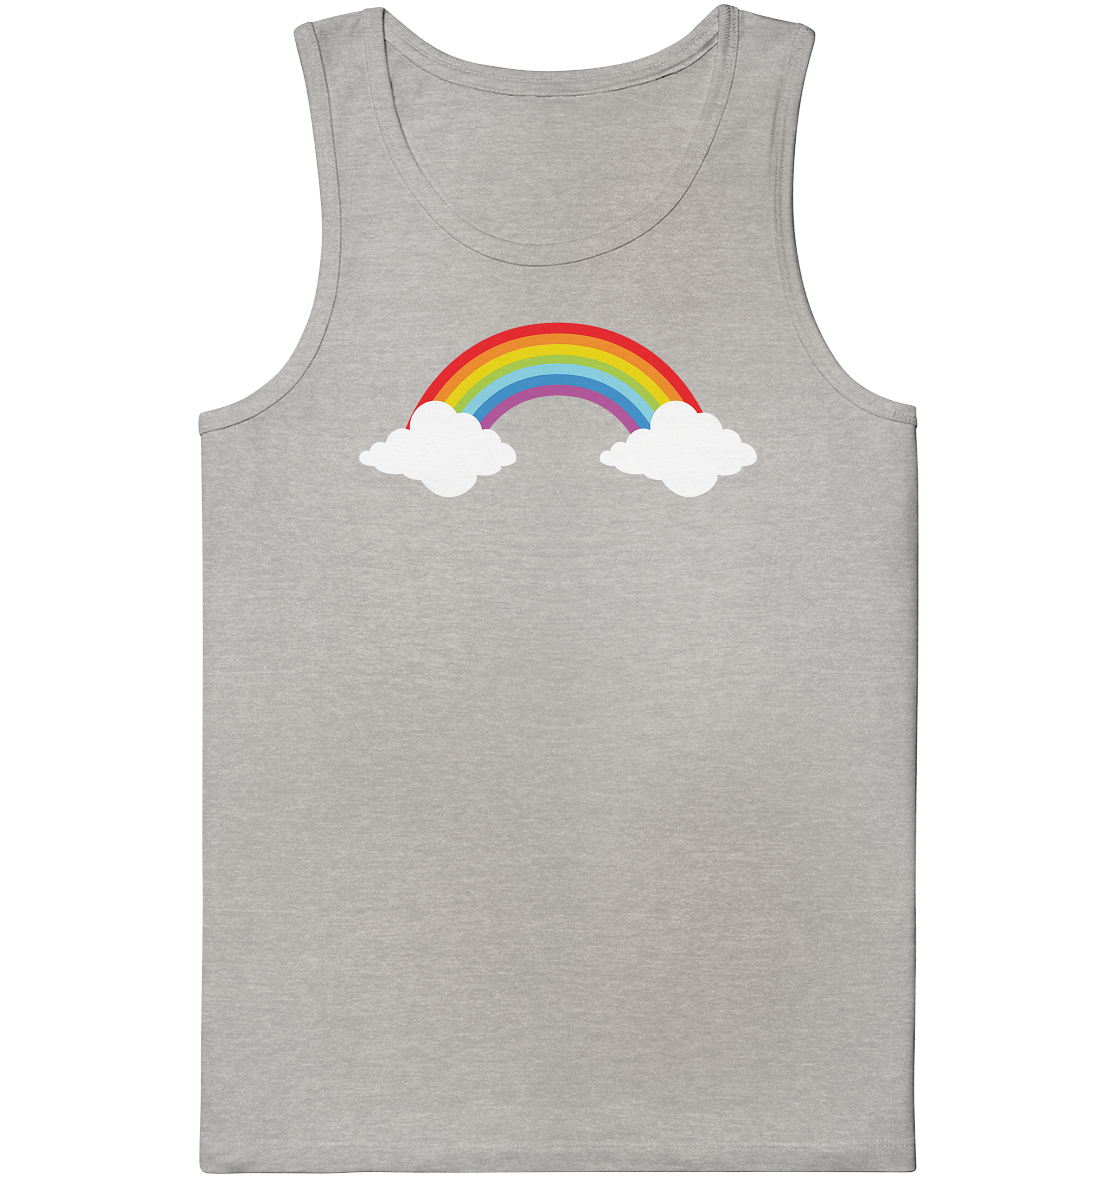 Rainbow with clouds - organic tank top